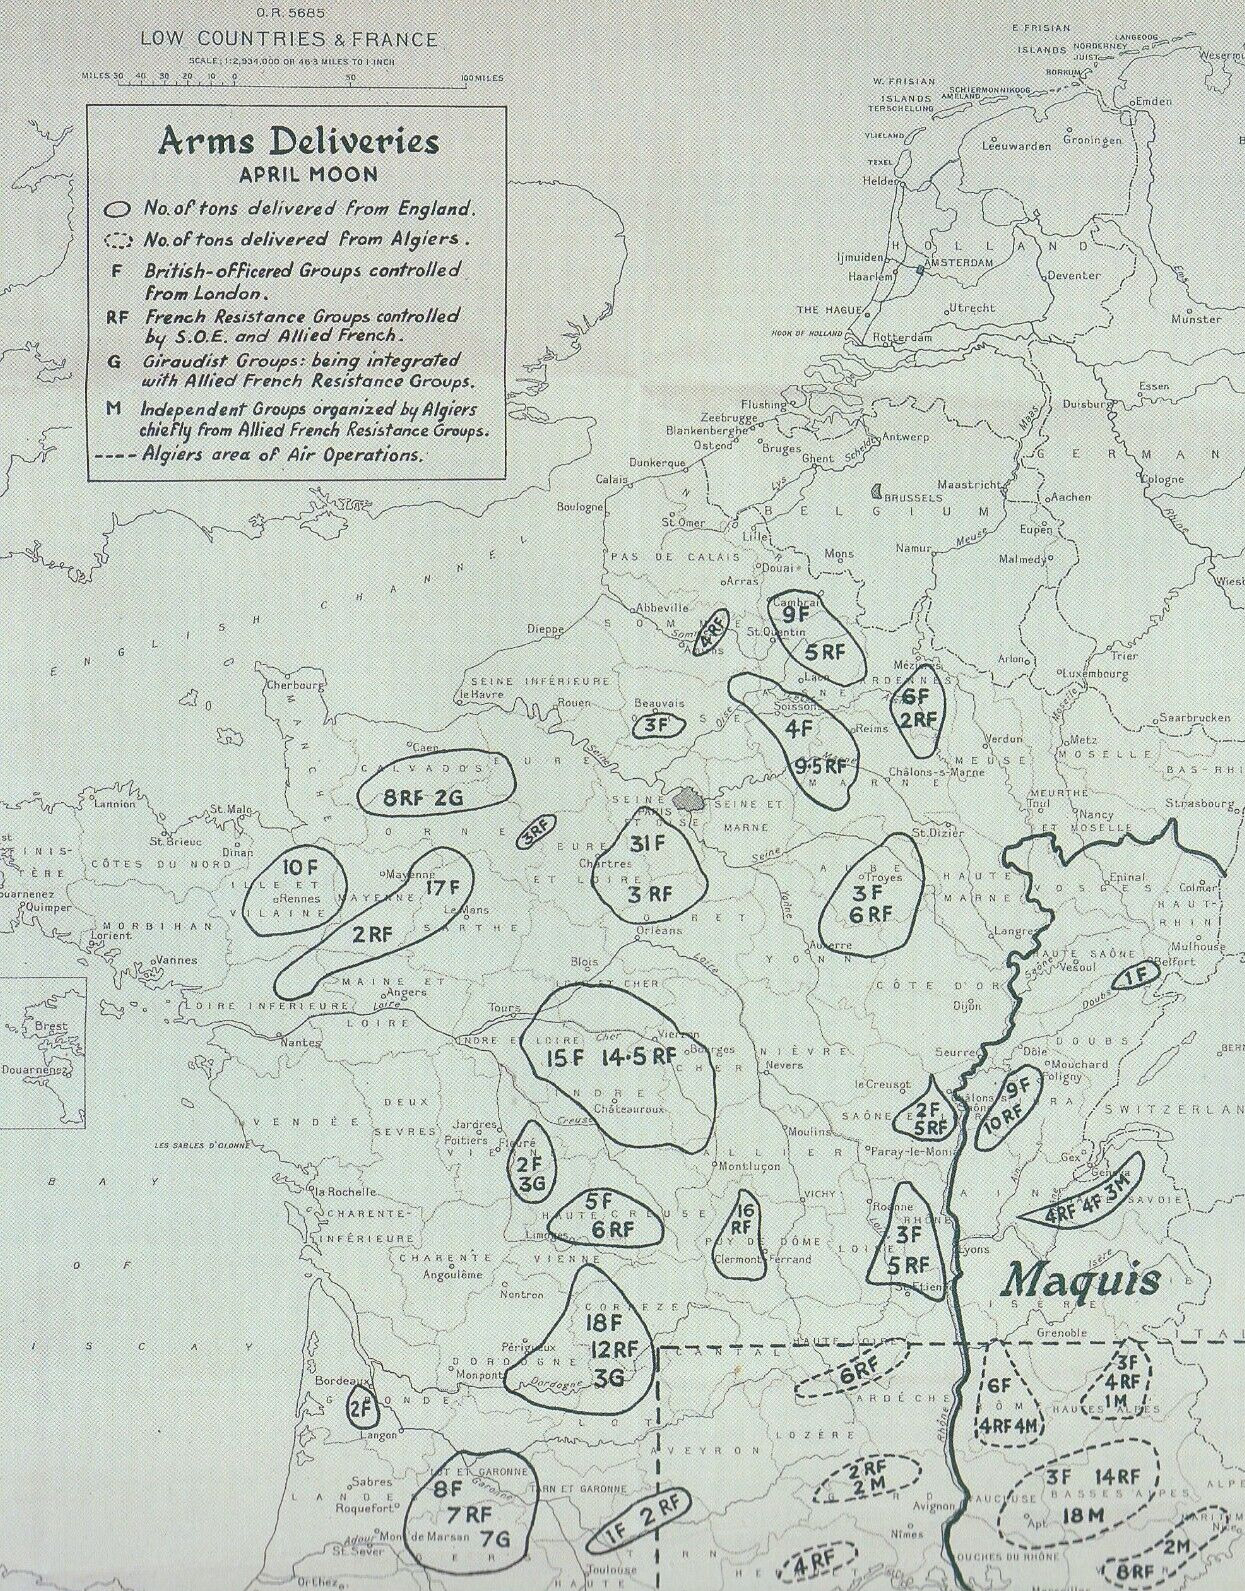 FRENCH RESISTANCE ARMS DELIVERIES BY RAF APRIL 1942 HISTORIC MOUNTED WAR MAP